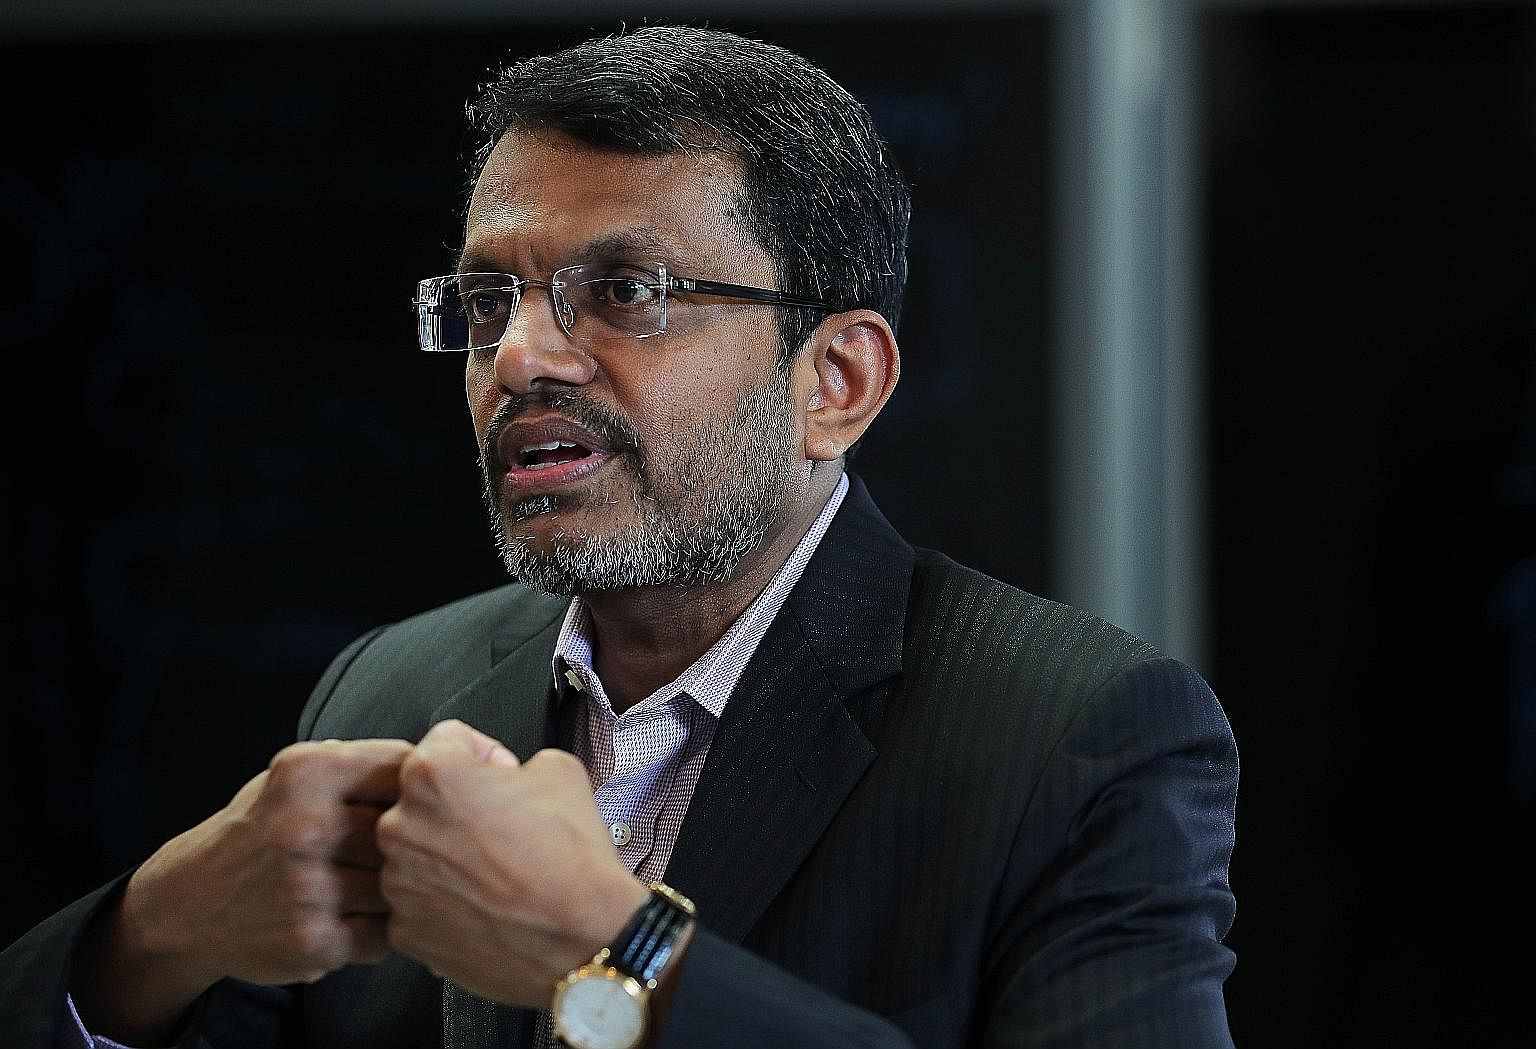 Enlightened new-age guardians like MAS managing director Ravi Menon are creating safe spaces for experimentation in "regulatory sandboxes". If Mr Menon's gambit works, Singapore will stake a claim to be one of the alternatives to post-Brexit London.